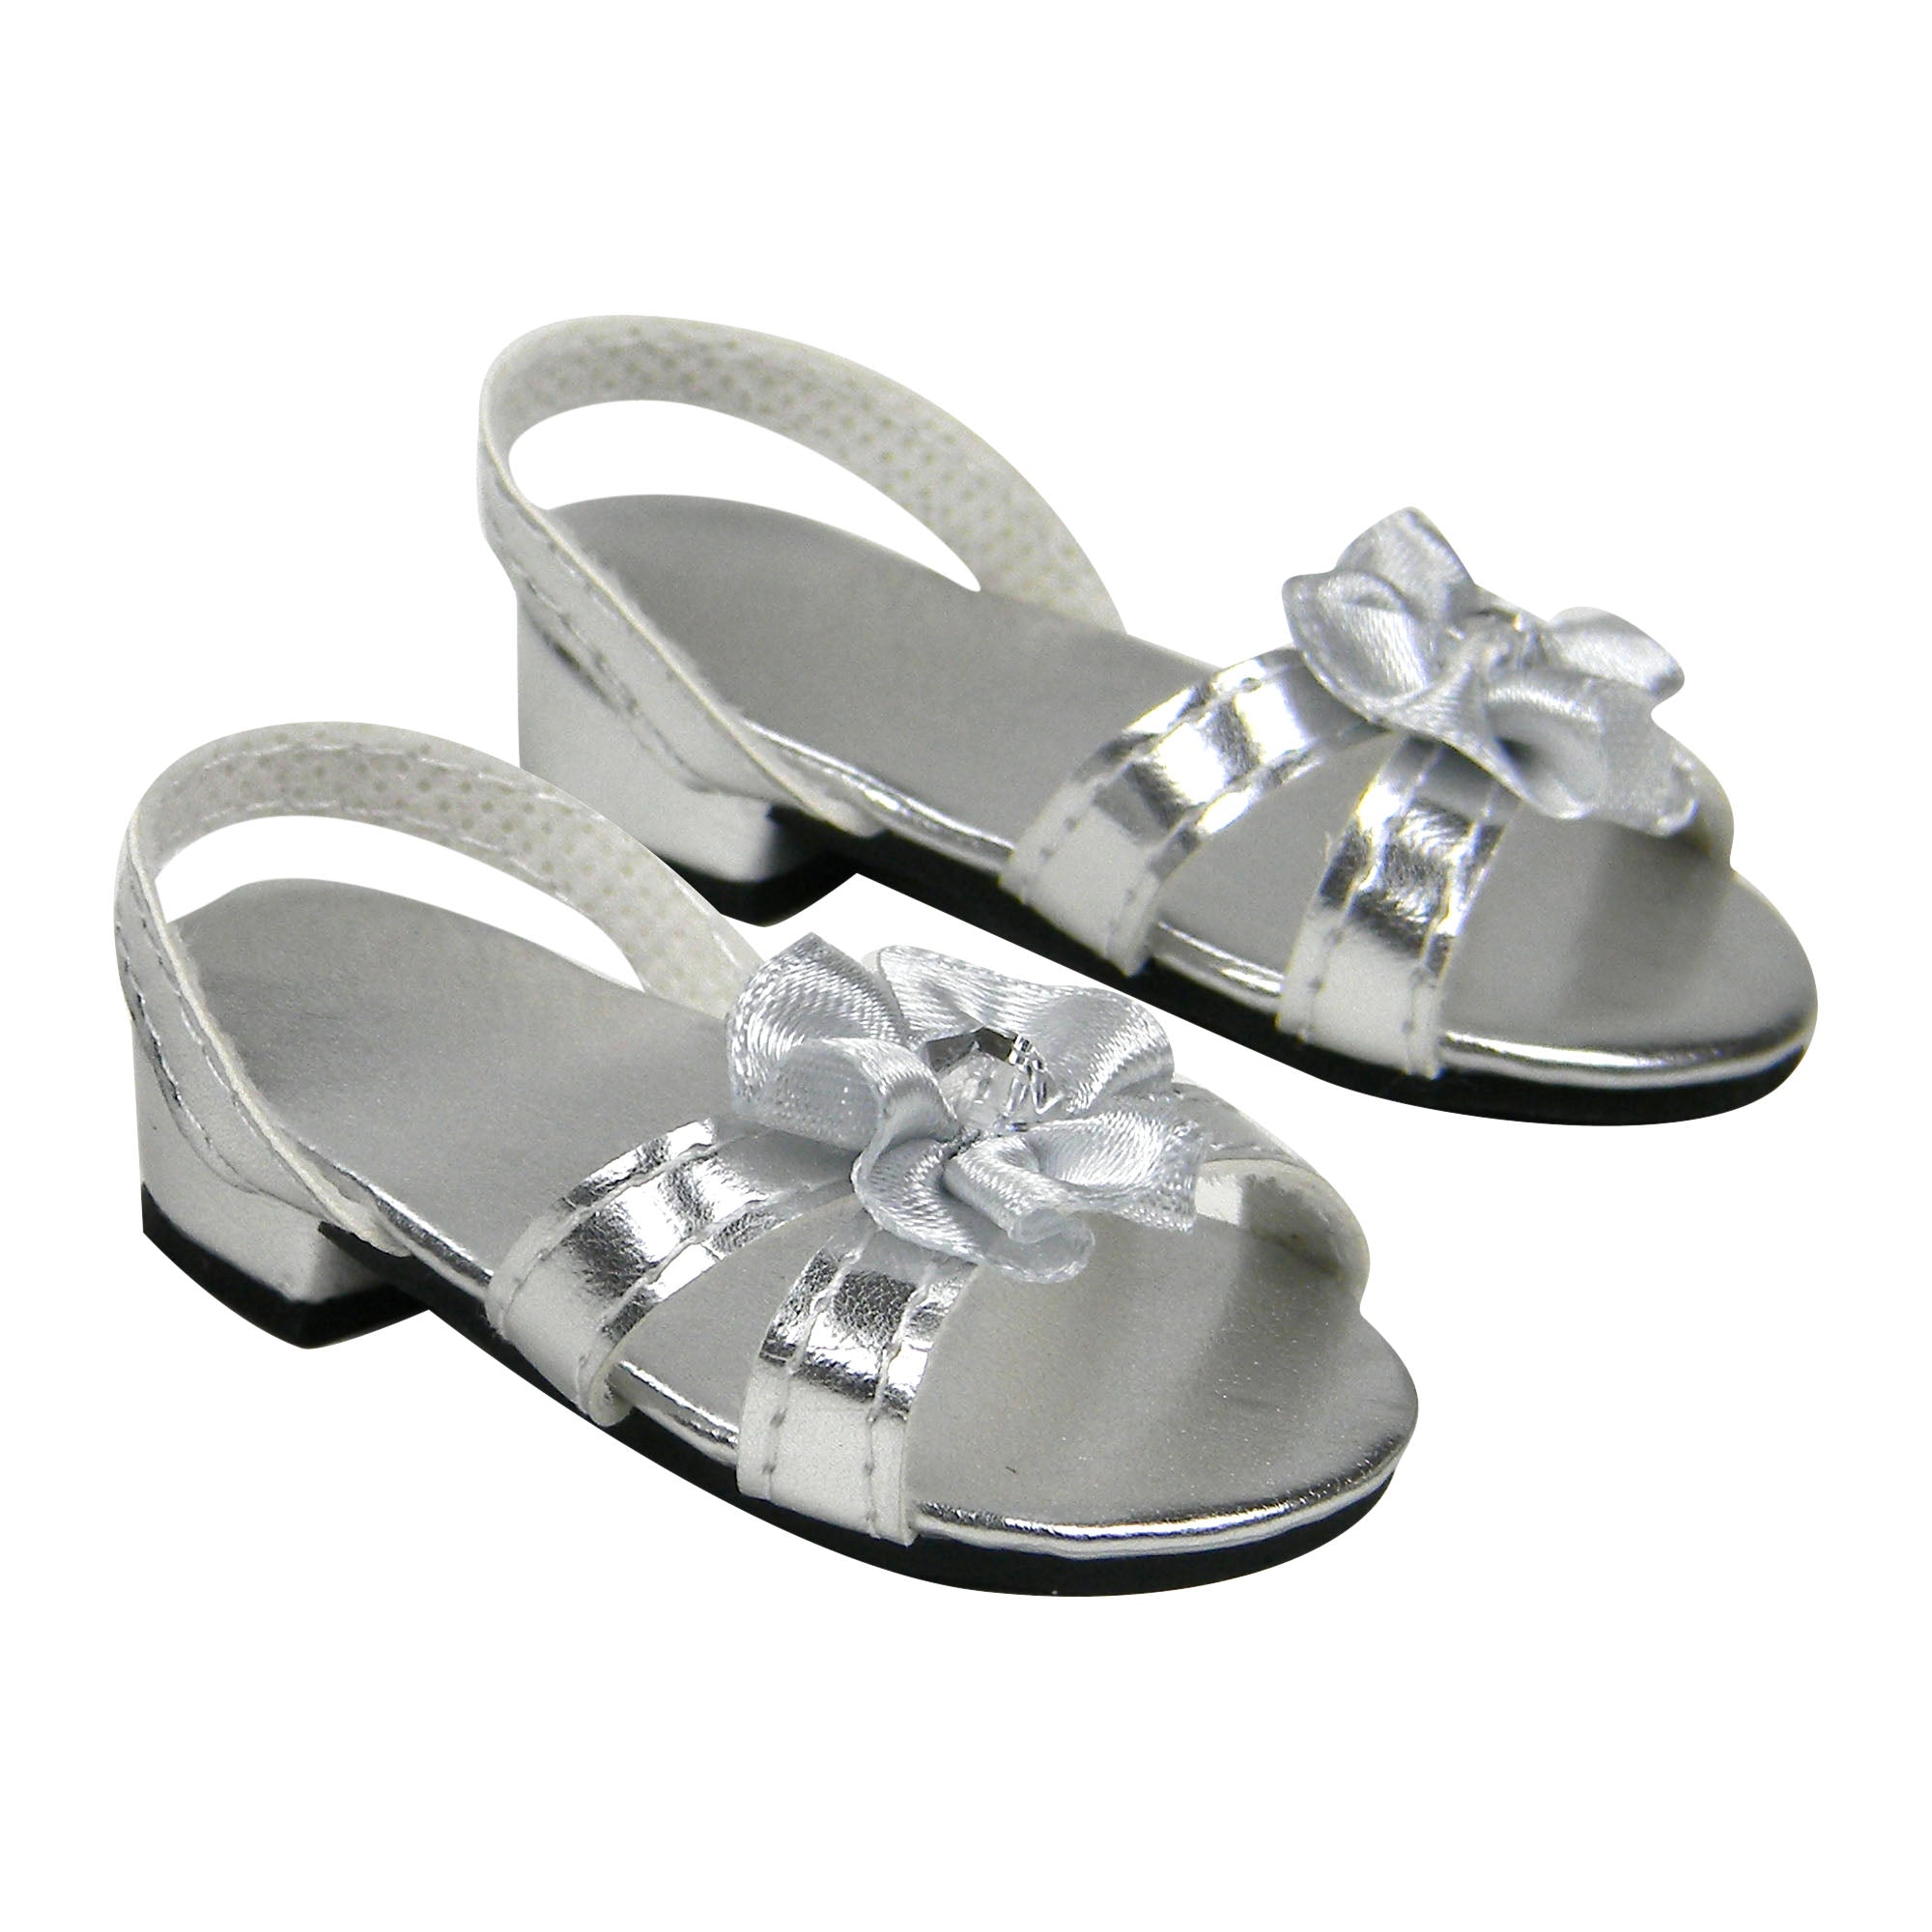 Sophia’s Cute Fancy Special Occasion Low-Heeled Metallic Strappy Dress Sandal Shoes for 18” Dolls, Silver